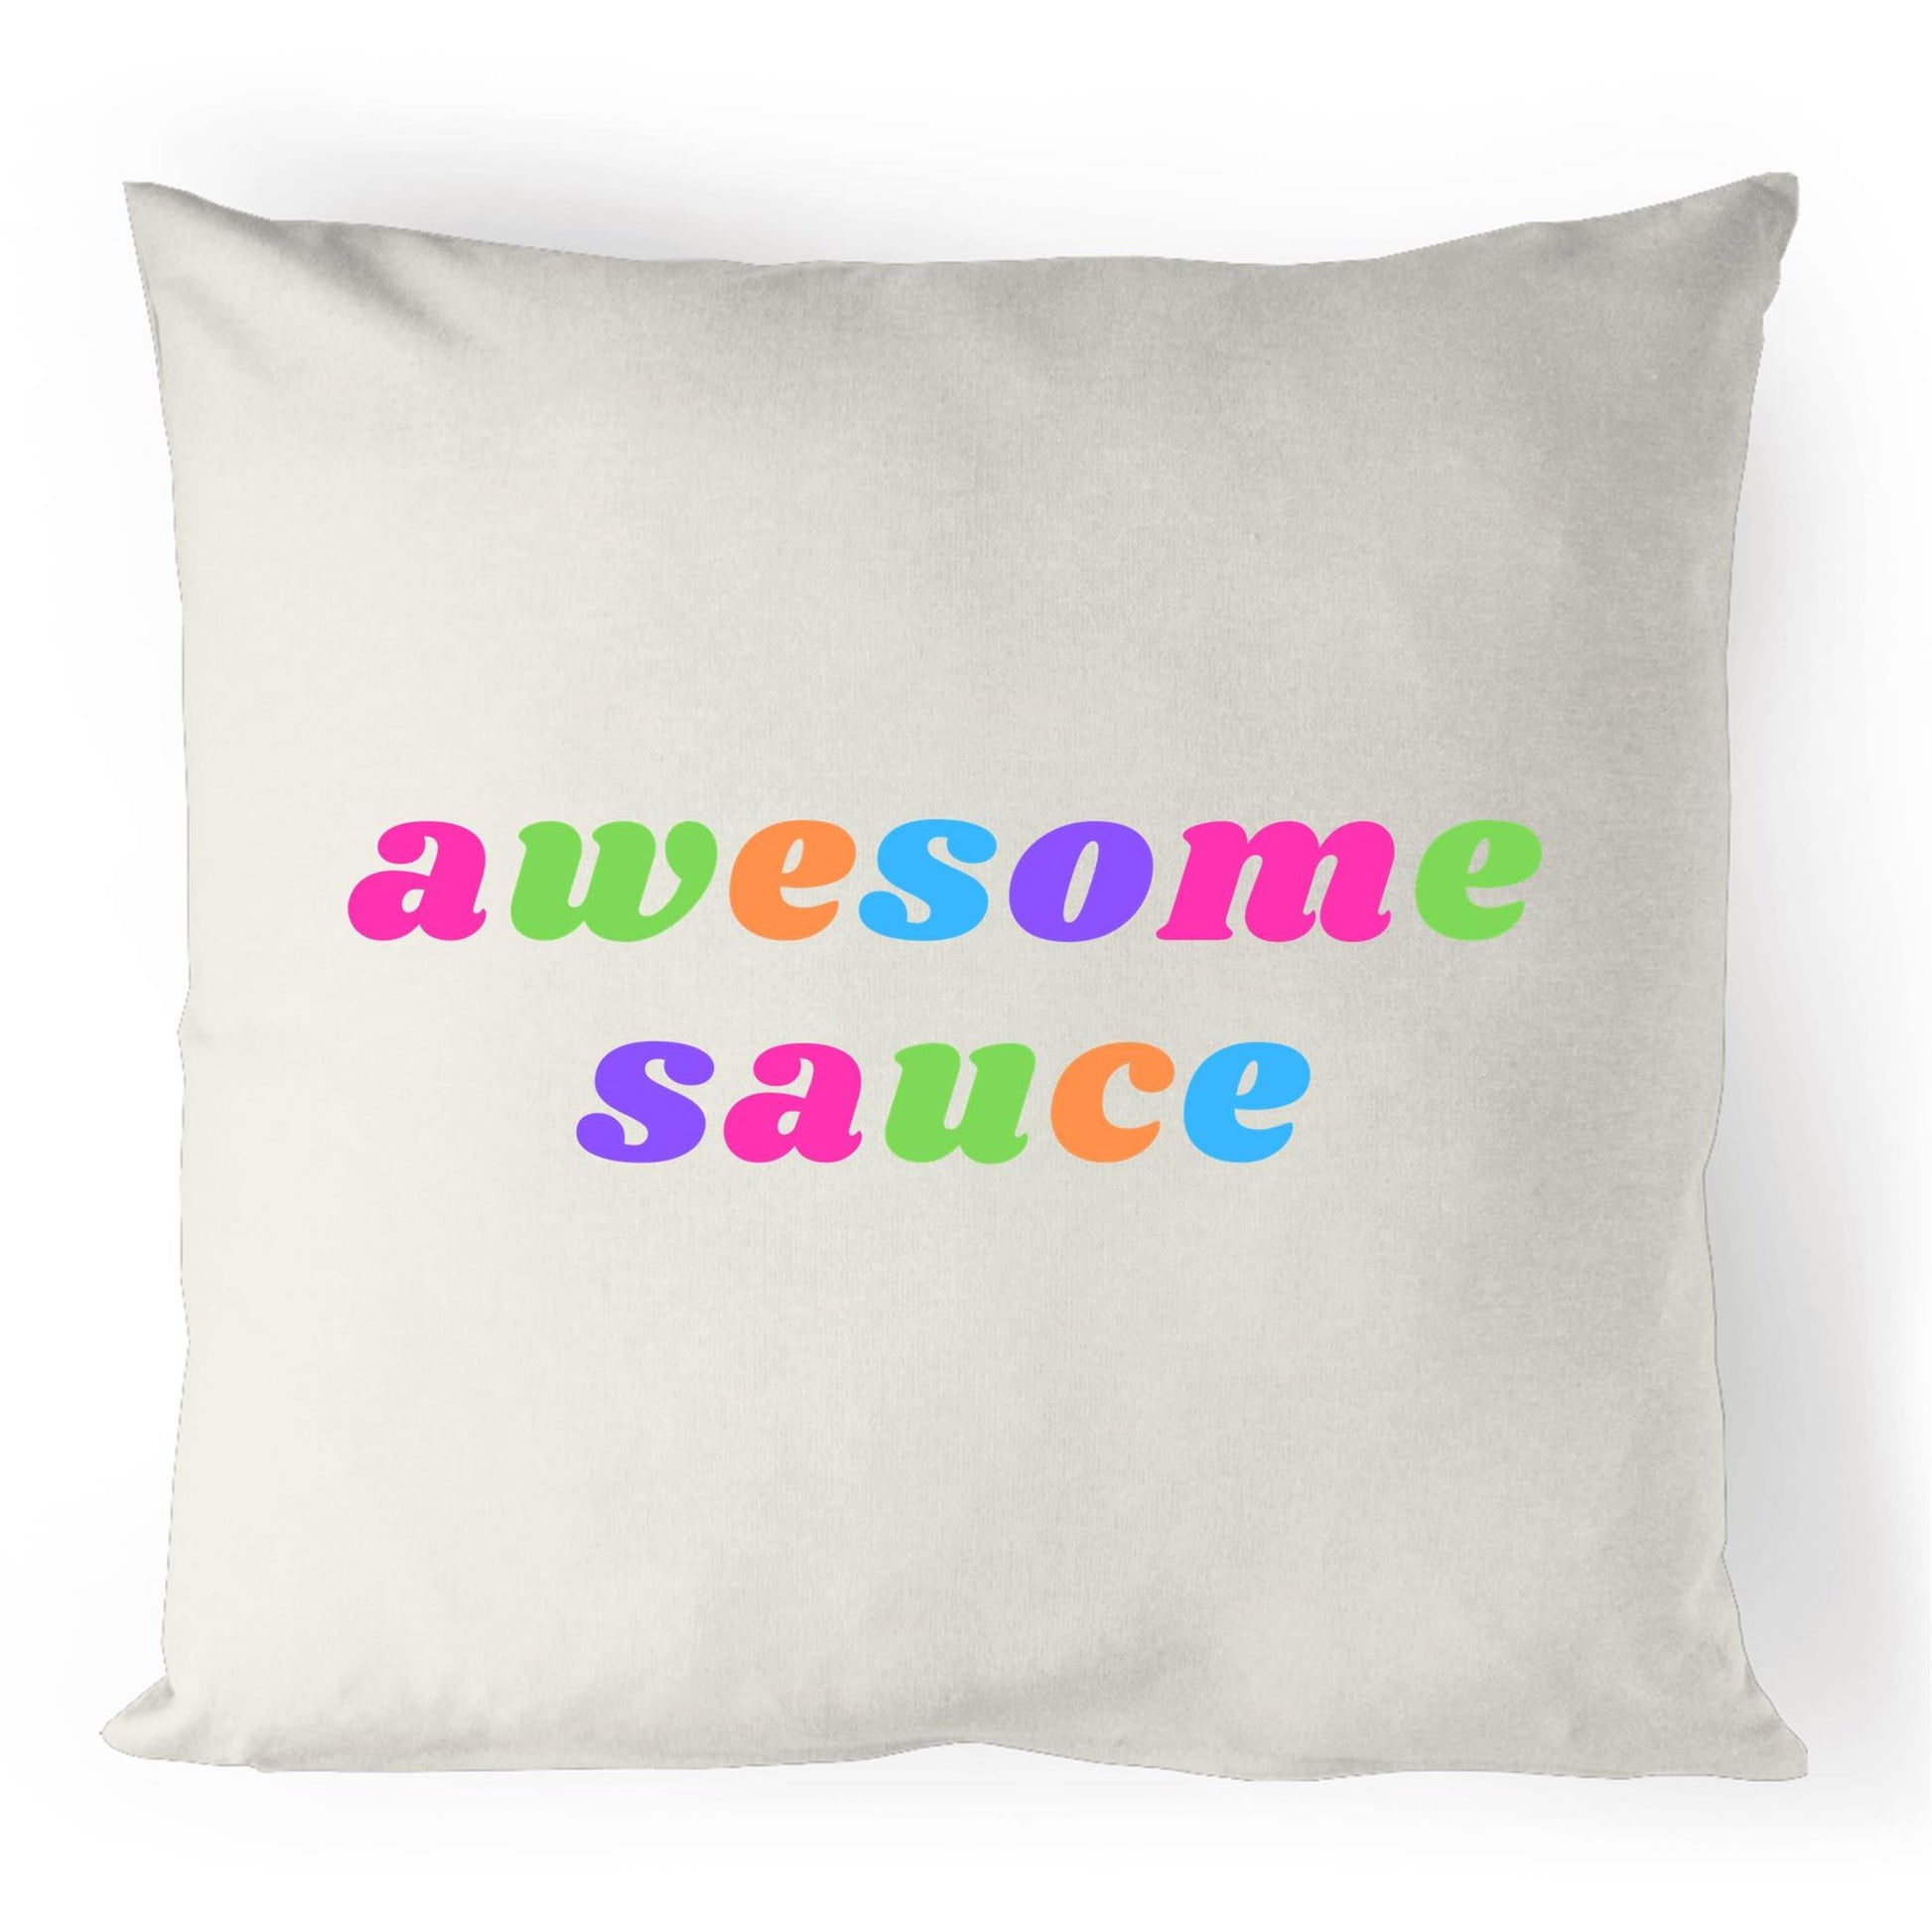 Awesome Sauce - 100% Linen Cushion Cover Natural One-Size Linen Cushion Cover